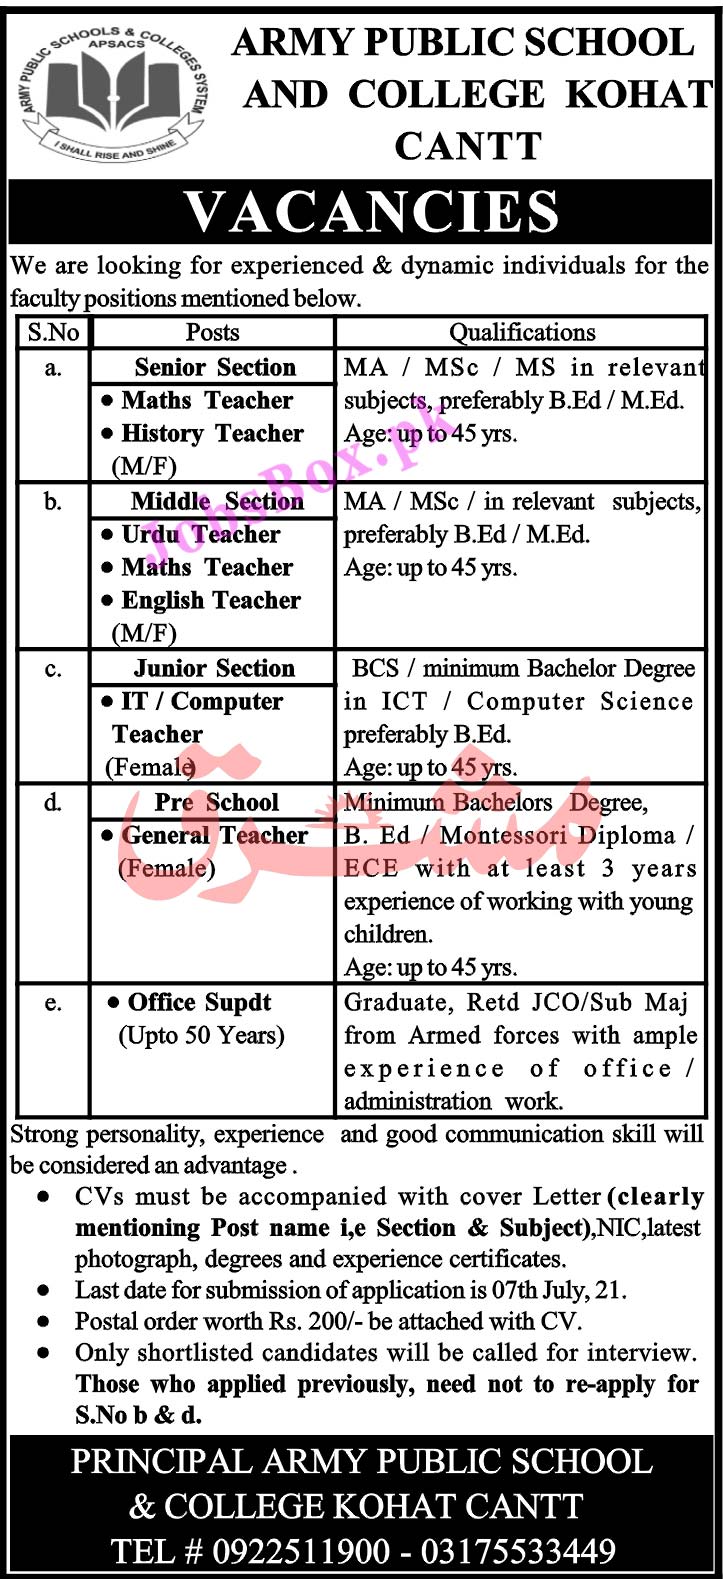 Army Public School and College Kohat Cantt Jobs 2021